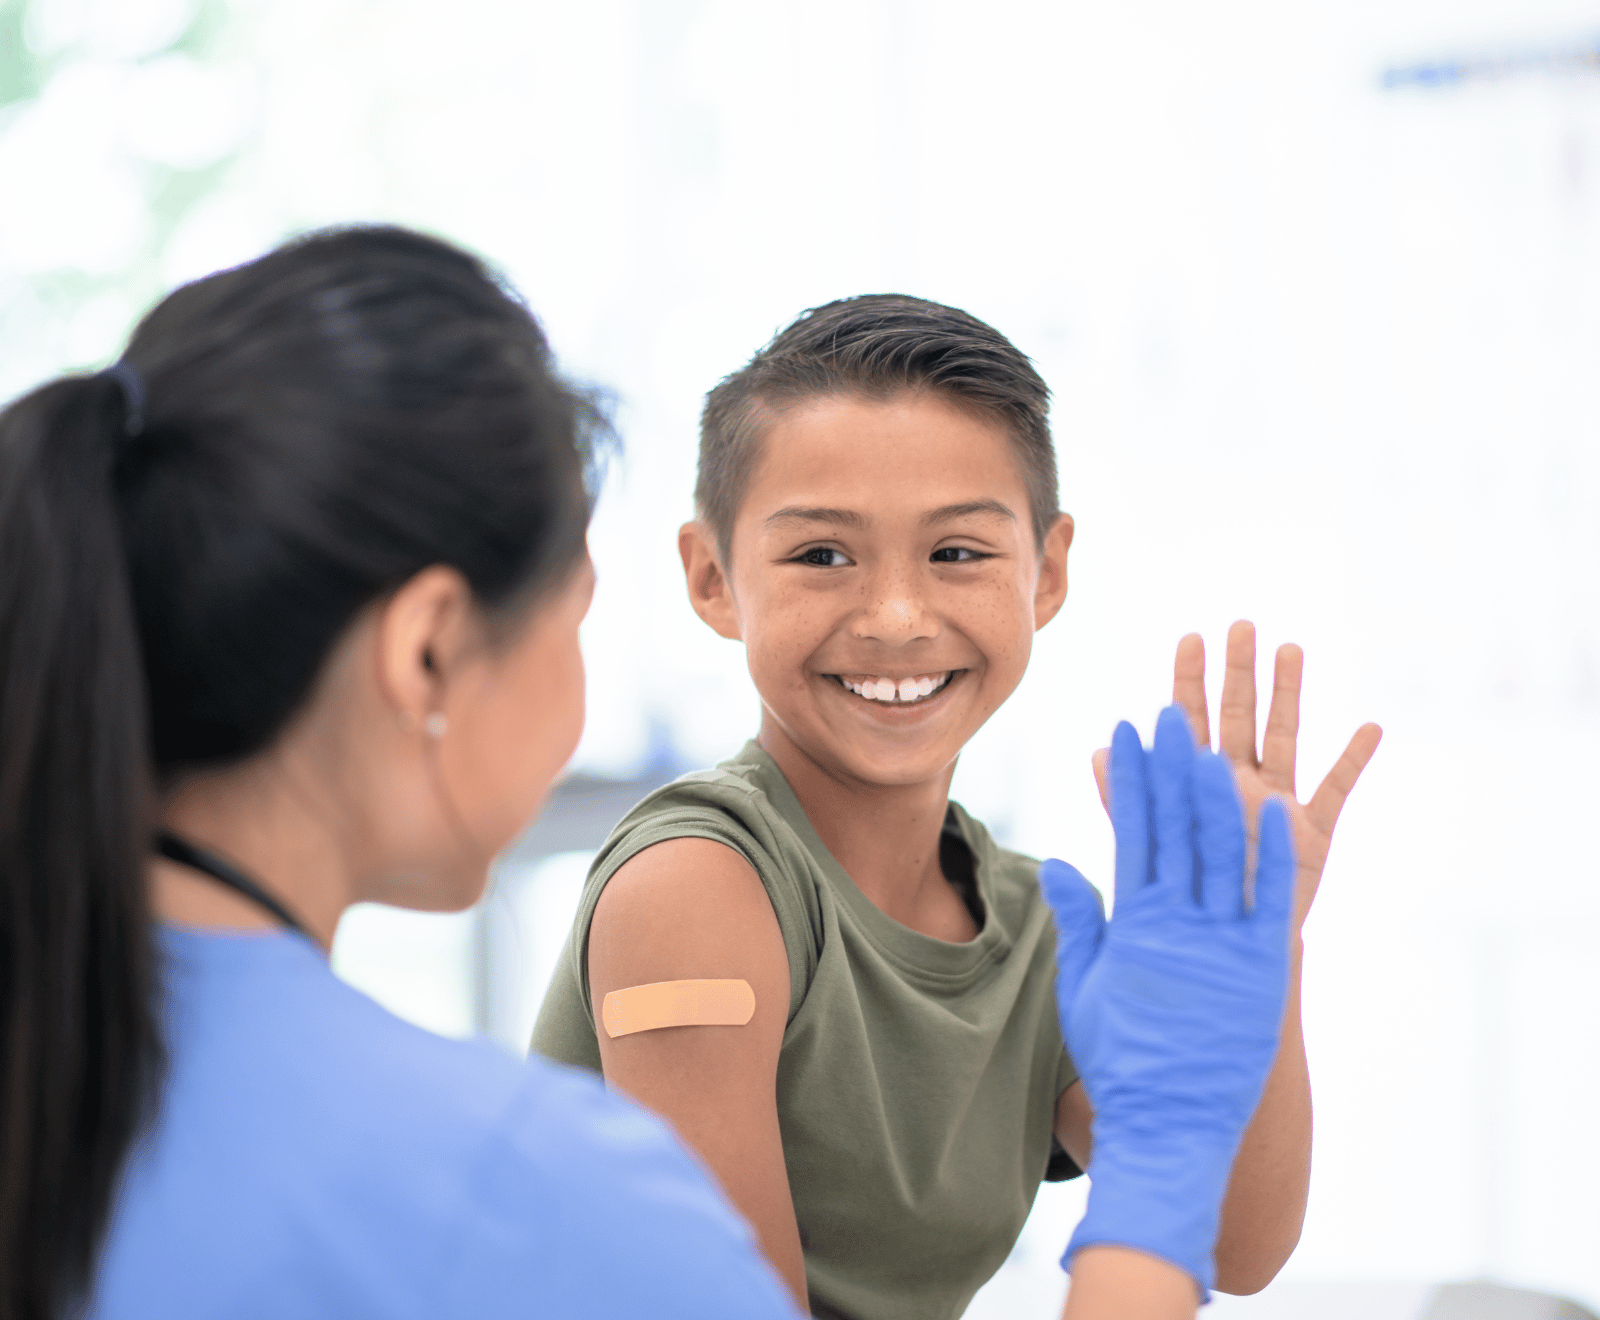 Boy with adhesive bandage on arm getting high fived by a medical worker